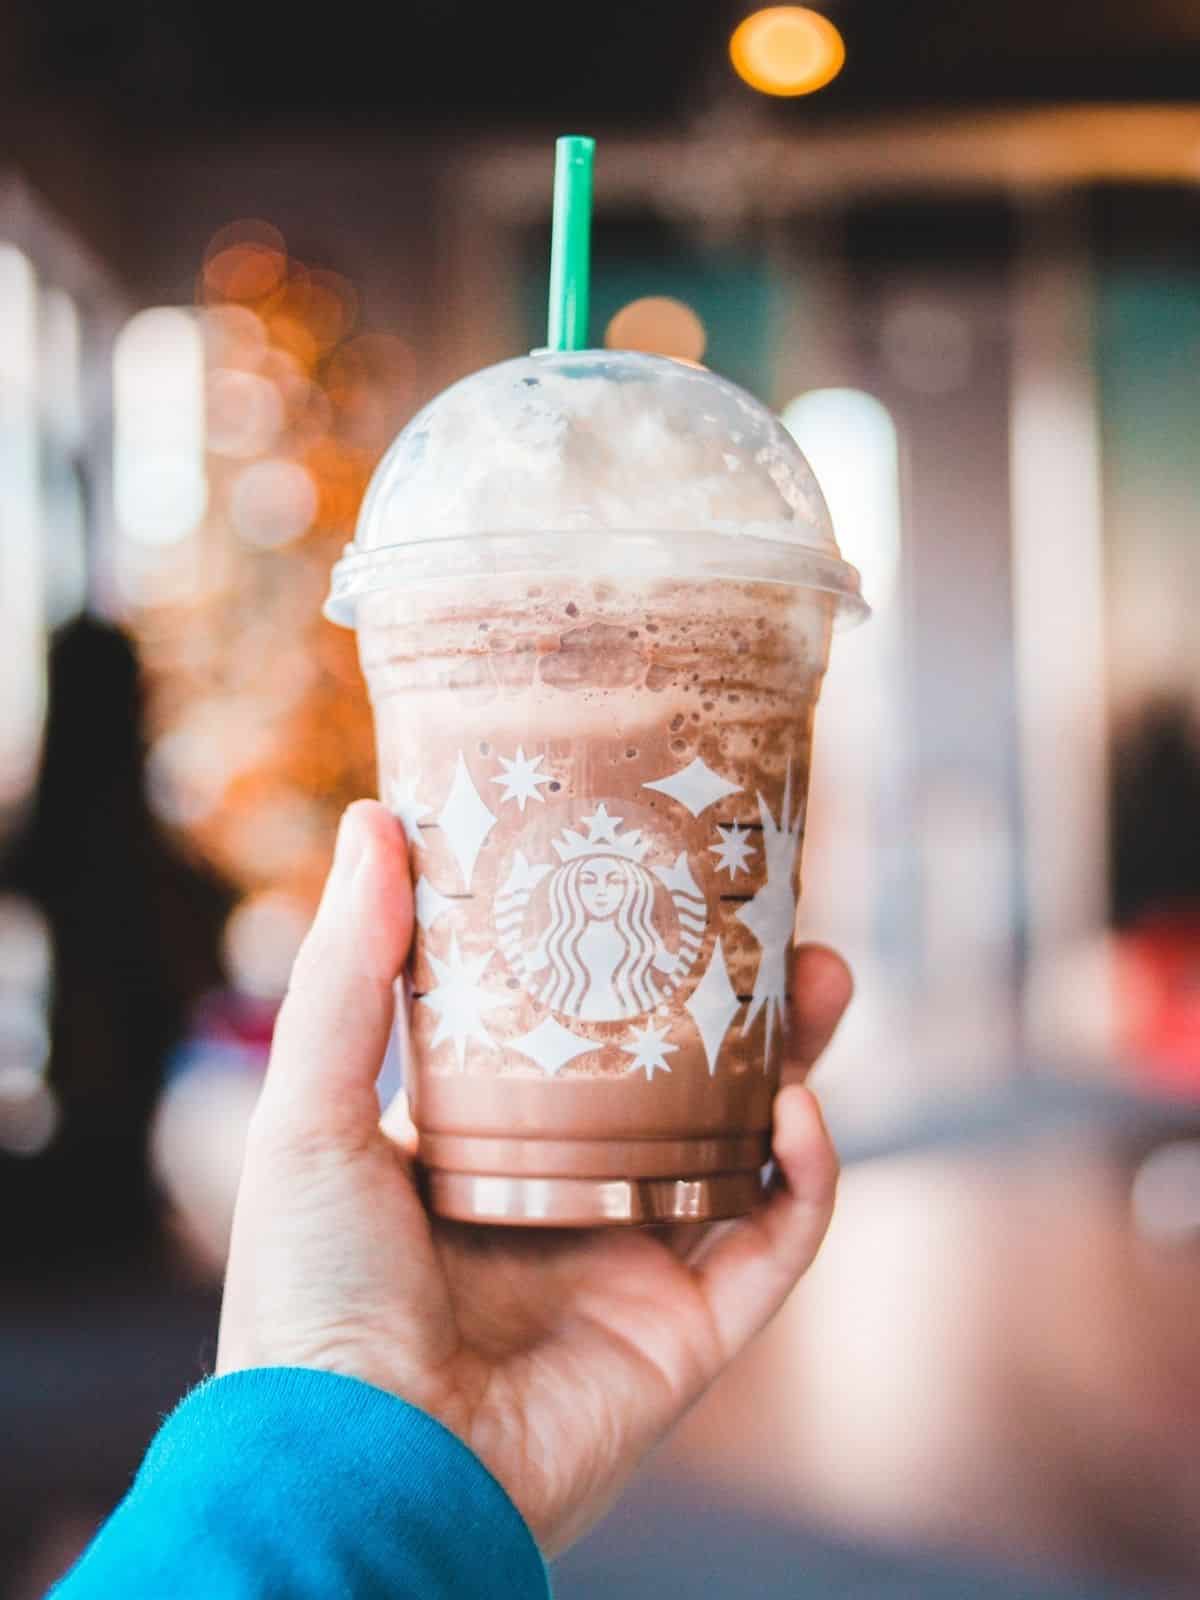 A hand holding a starbucks drink with a straw.